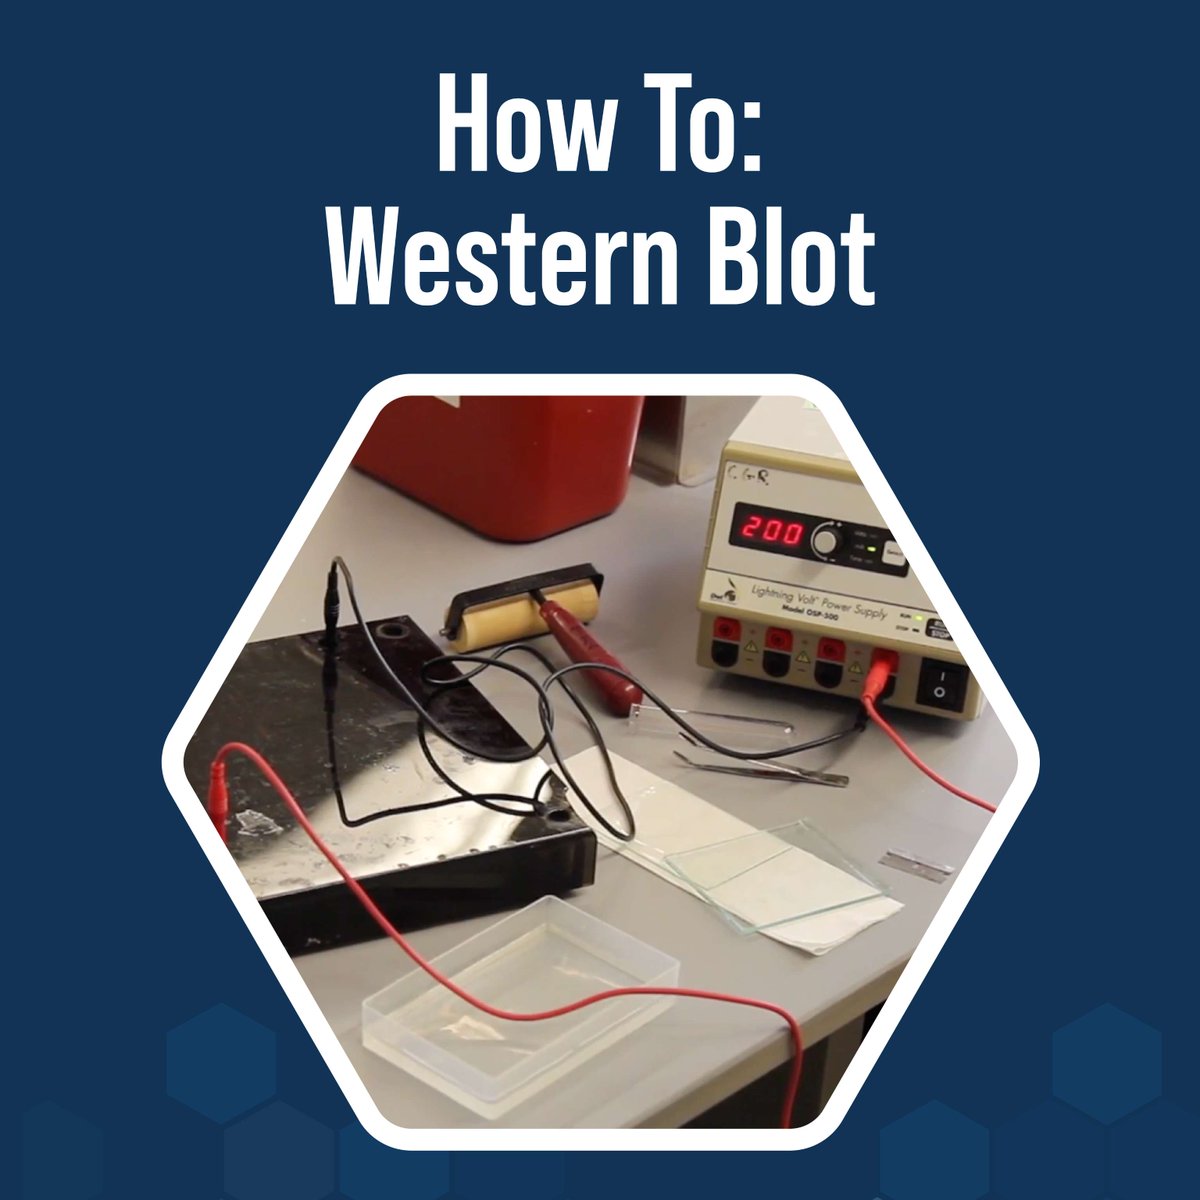 Join Nico, a passionate PhD student from Harvard University, as he walks through the intricacies of performing a Western blot. Watch the full video to learn more: labxchange.org/library/items/… #ScienceTutorial #MolecularBiology #WesternBlotting